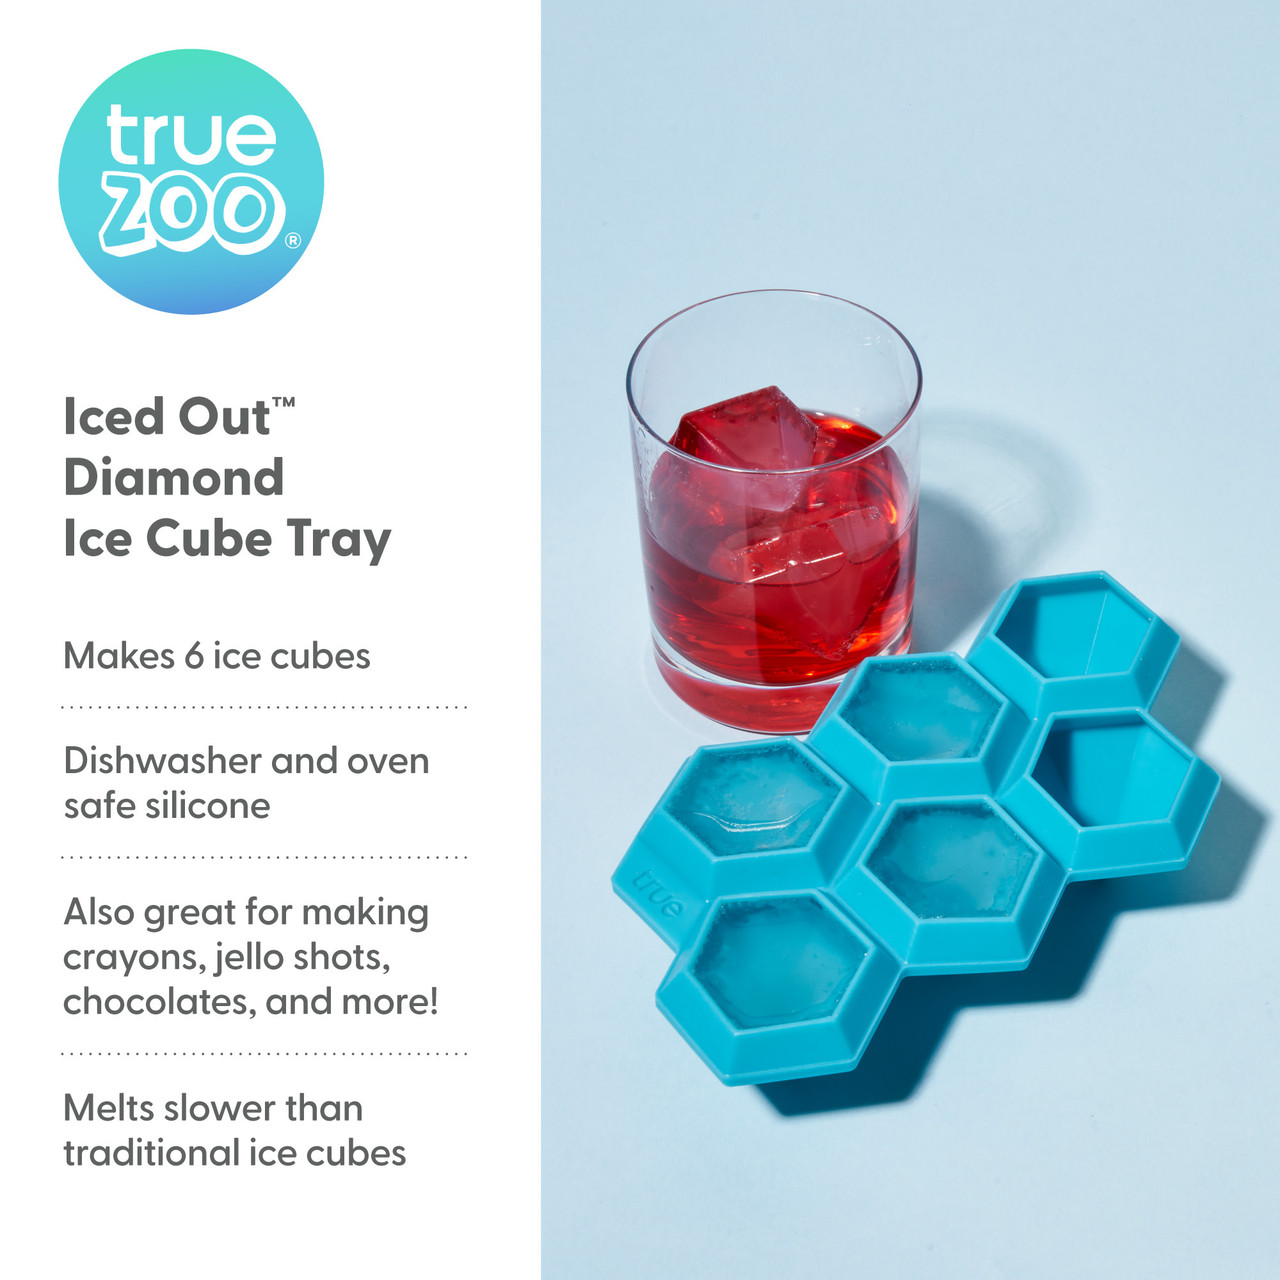 Iced Out Diamond Ice Cube Tray by TrueZoo